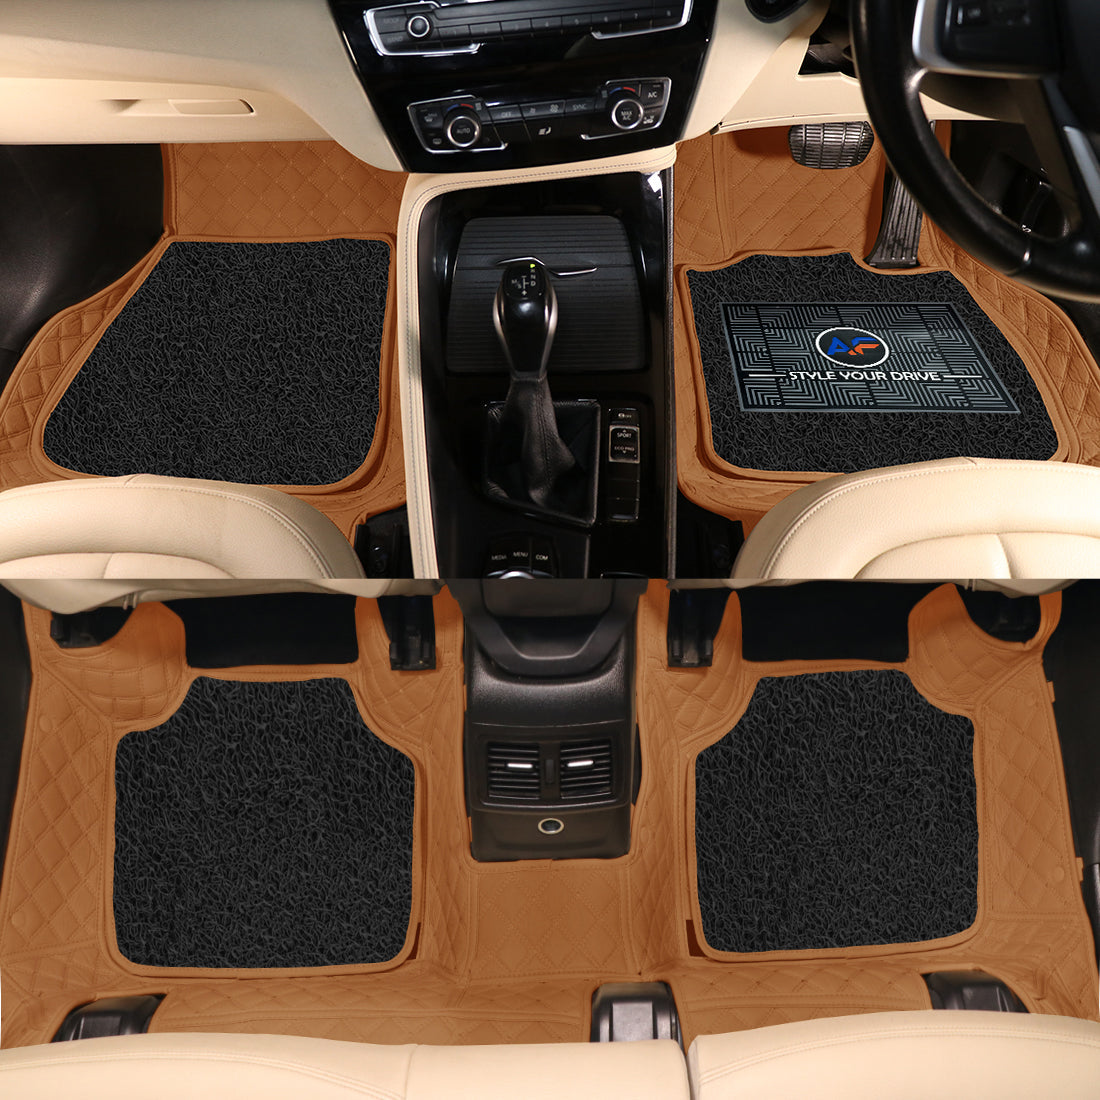 Volvo XC60 2019 7D Luxury Car Mat, All Weather Proof, Anti-Skid, 100% Waterproof & Odorless with Unique Diamond Fish Design (24mm Luxury PU Leather, 2 Rows)